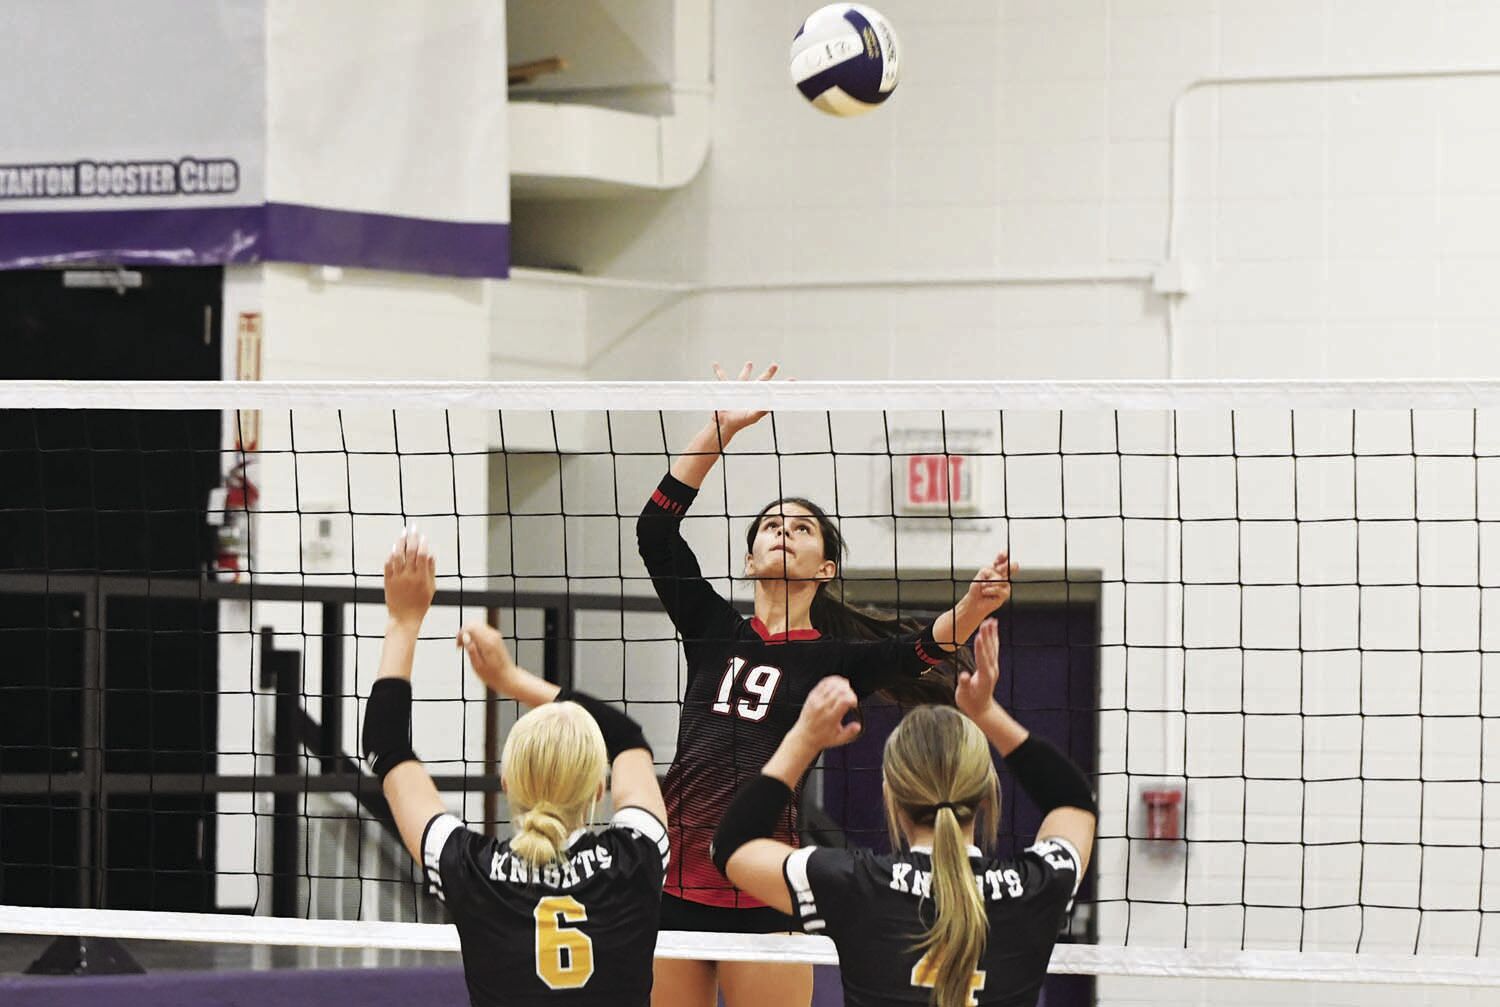 Cindy Swain’s Passion for Volleyball Shines in Multi-Sport High School Journey